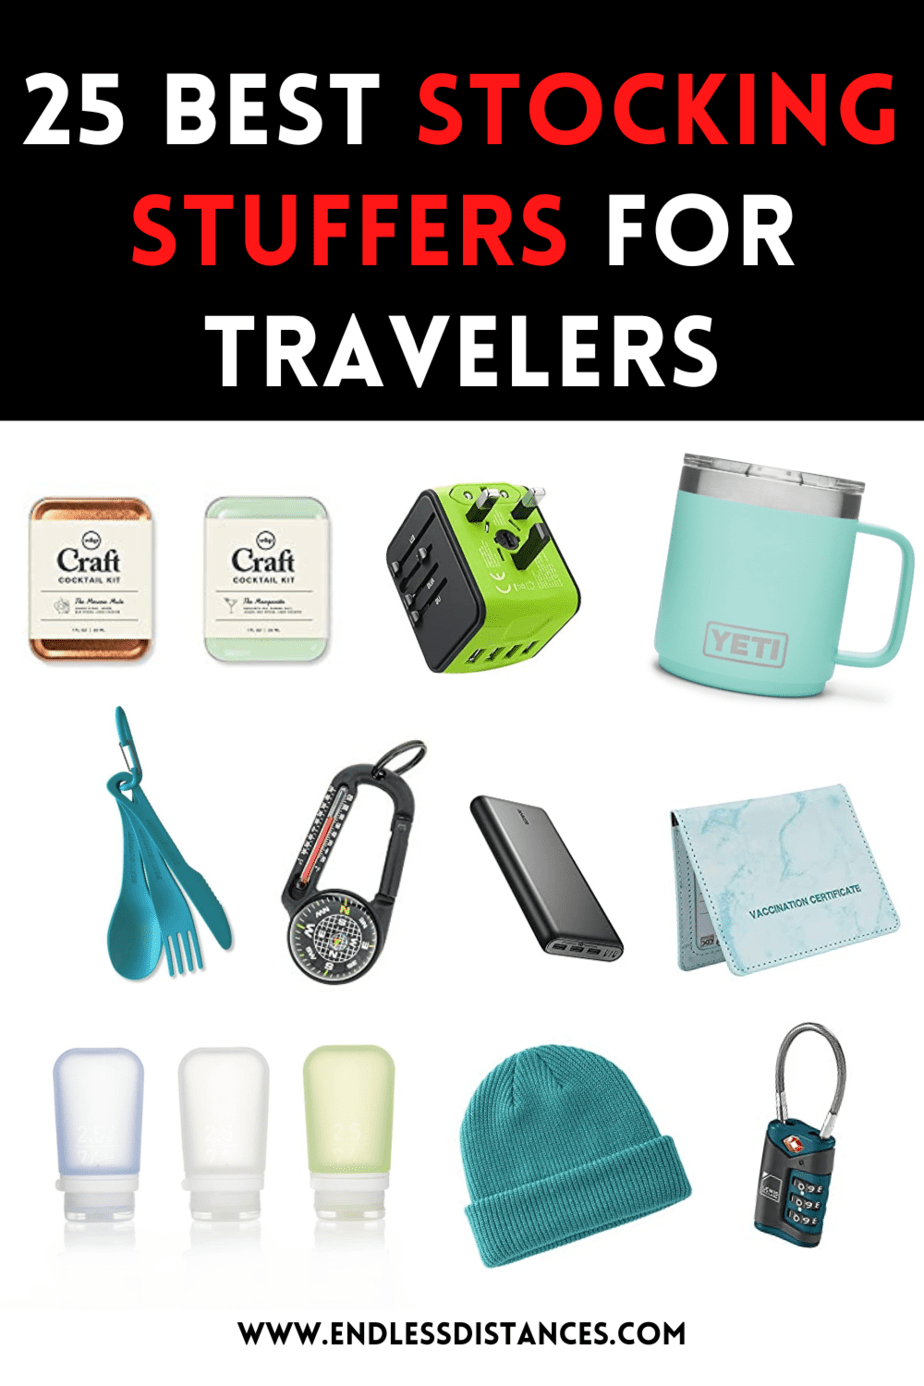 https://www.endlessdistances.com/wp-content/uploads/2019/11/25-best-stocking-stuffers-for-travelers.png